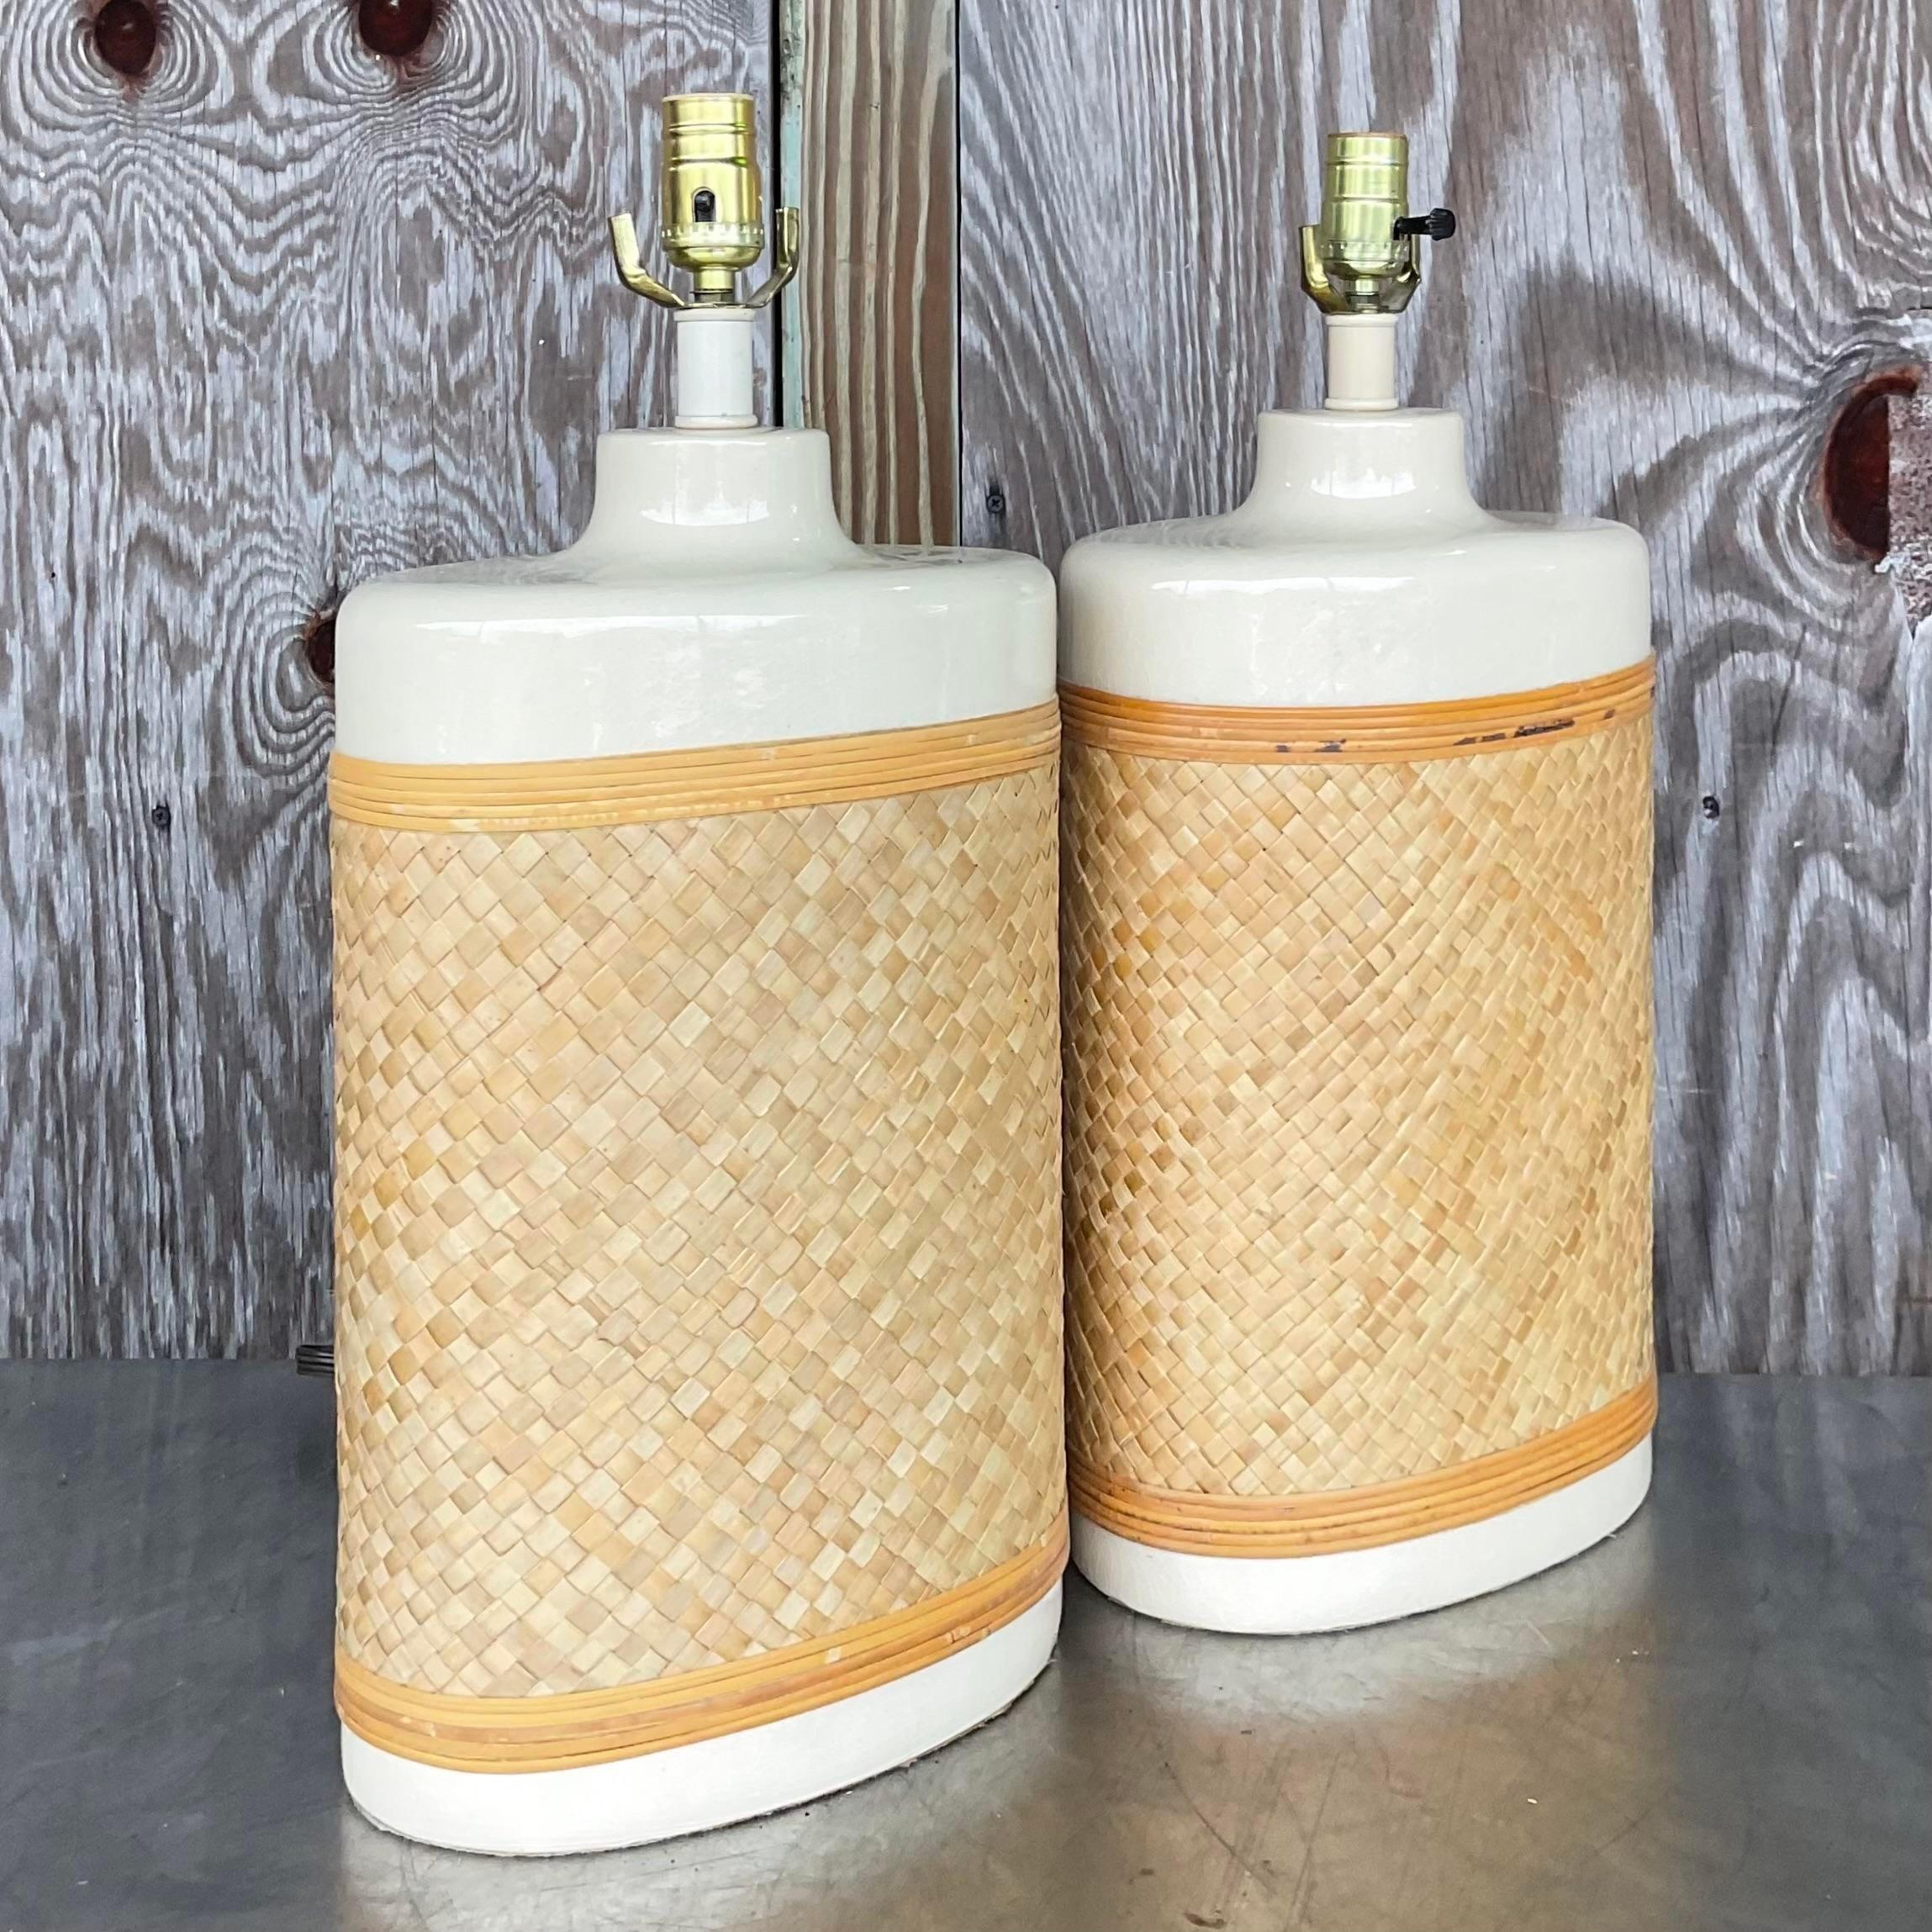 A fabulous pair of Coastal table lamps. Chic panels of woven rattan that are wrapped around a glazed ceramic lamp. Simple and cool. Acquired from a Palm Beach estate.